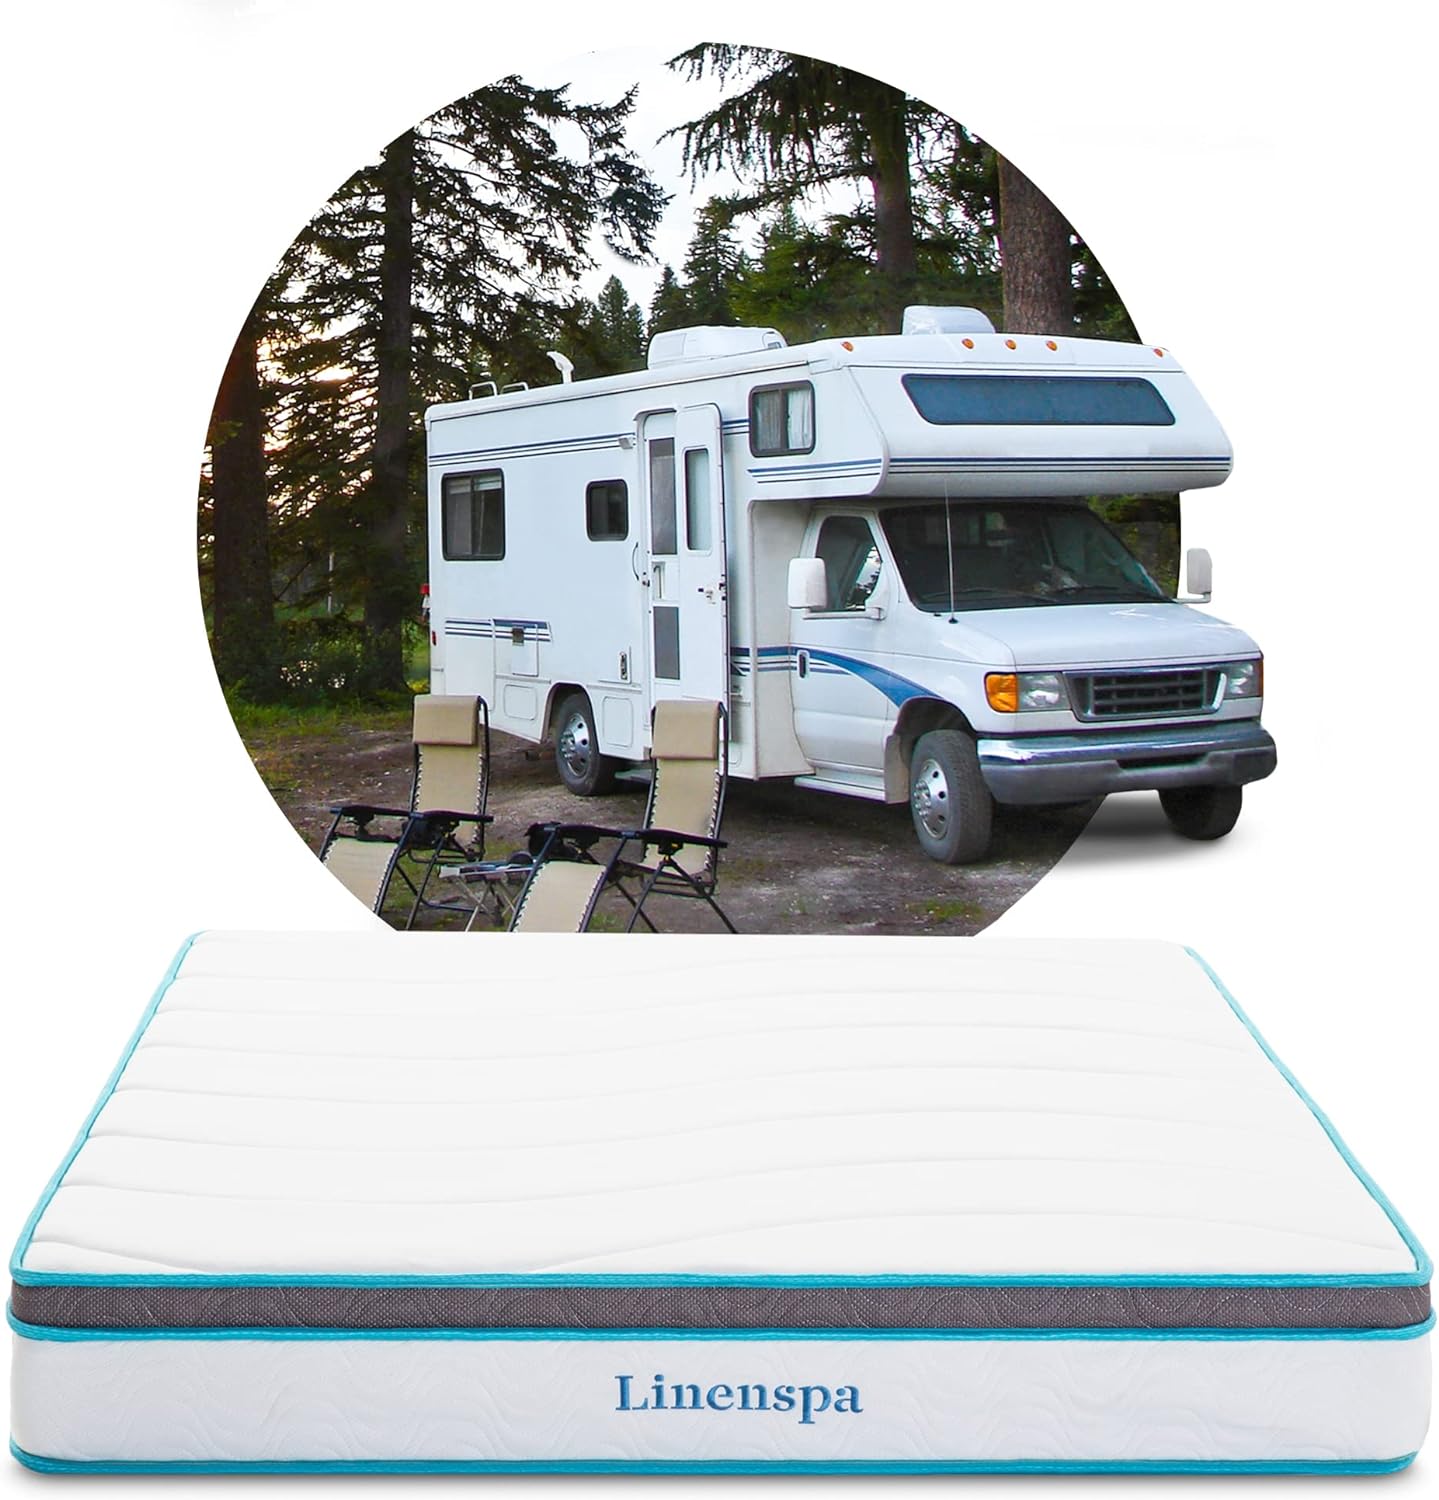 LINENSPA 8 Inch Memory Foam and Innerspring Hybrid RV, Trailer, & Camper Mattress Cooling & Conforming Support Short Queen Size Medium Firm Feel Bed in a Box CertiPUR-US Certified Short Queen 8 Inch Mattress Only - image 1 of 5